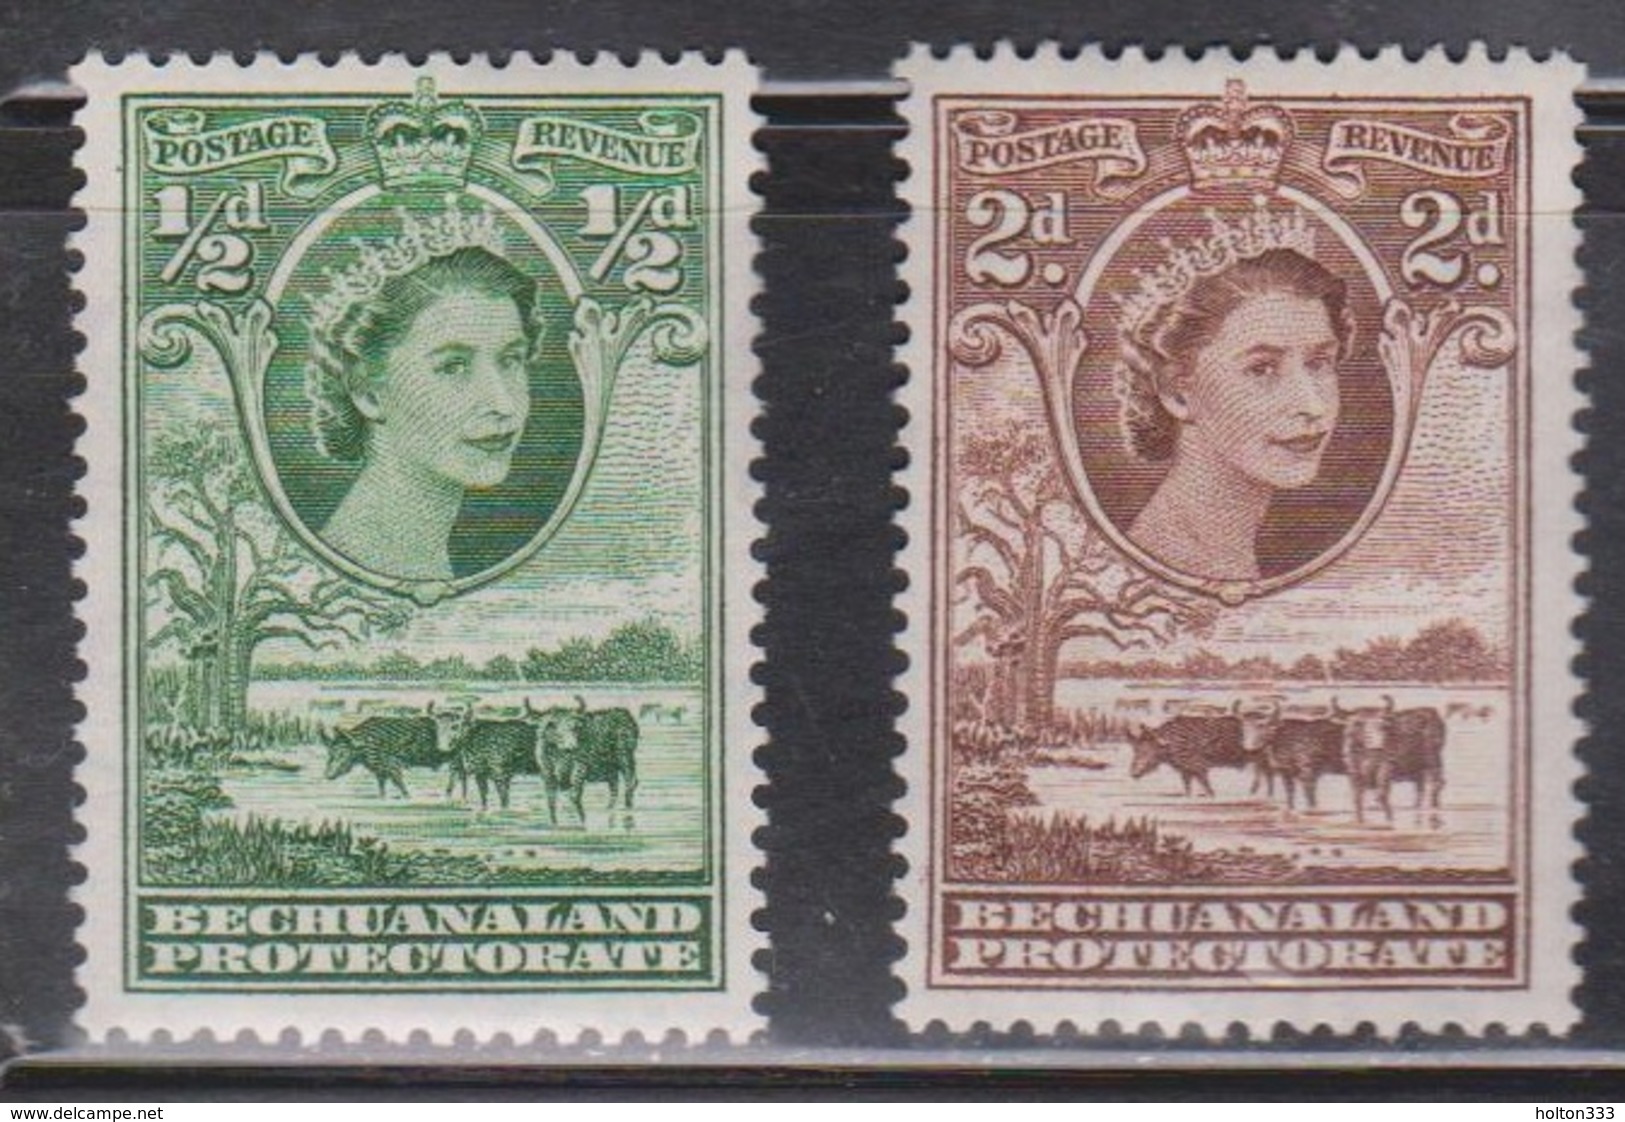 BECHUANALAND PROTECTORATE Scott # 154, 156 MH - QEII & Cattle - 1933-1964 Crown Colony